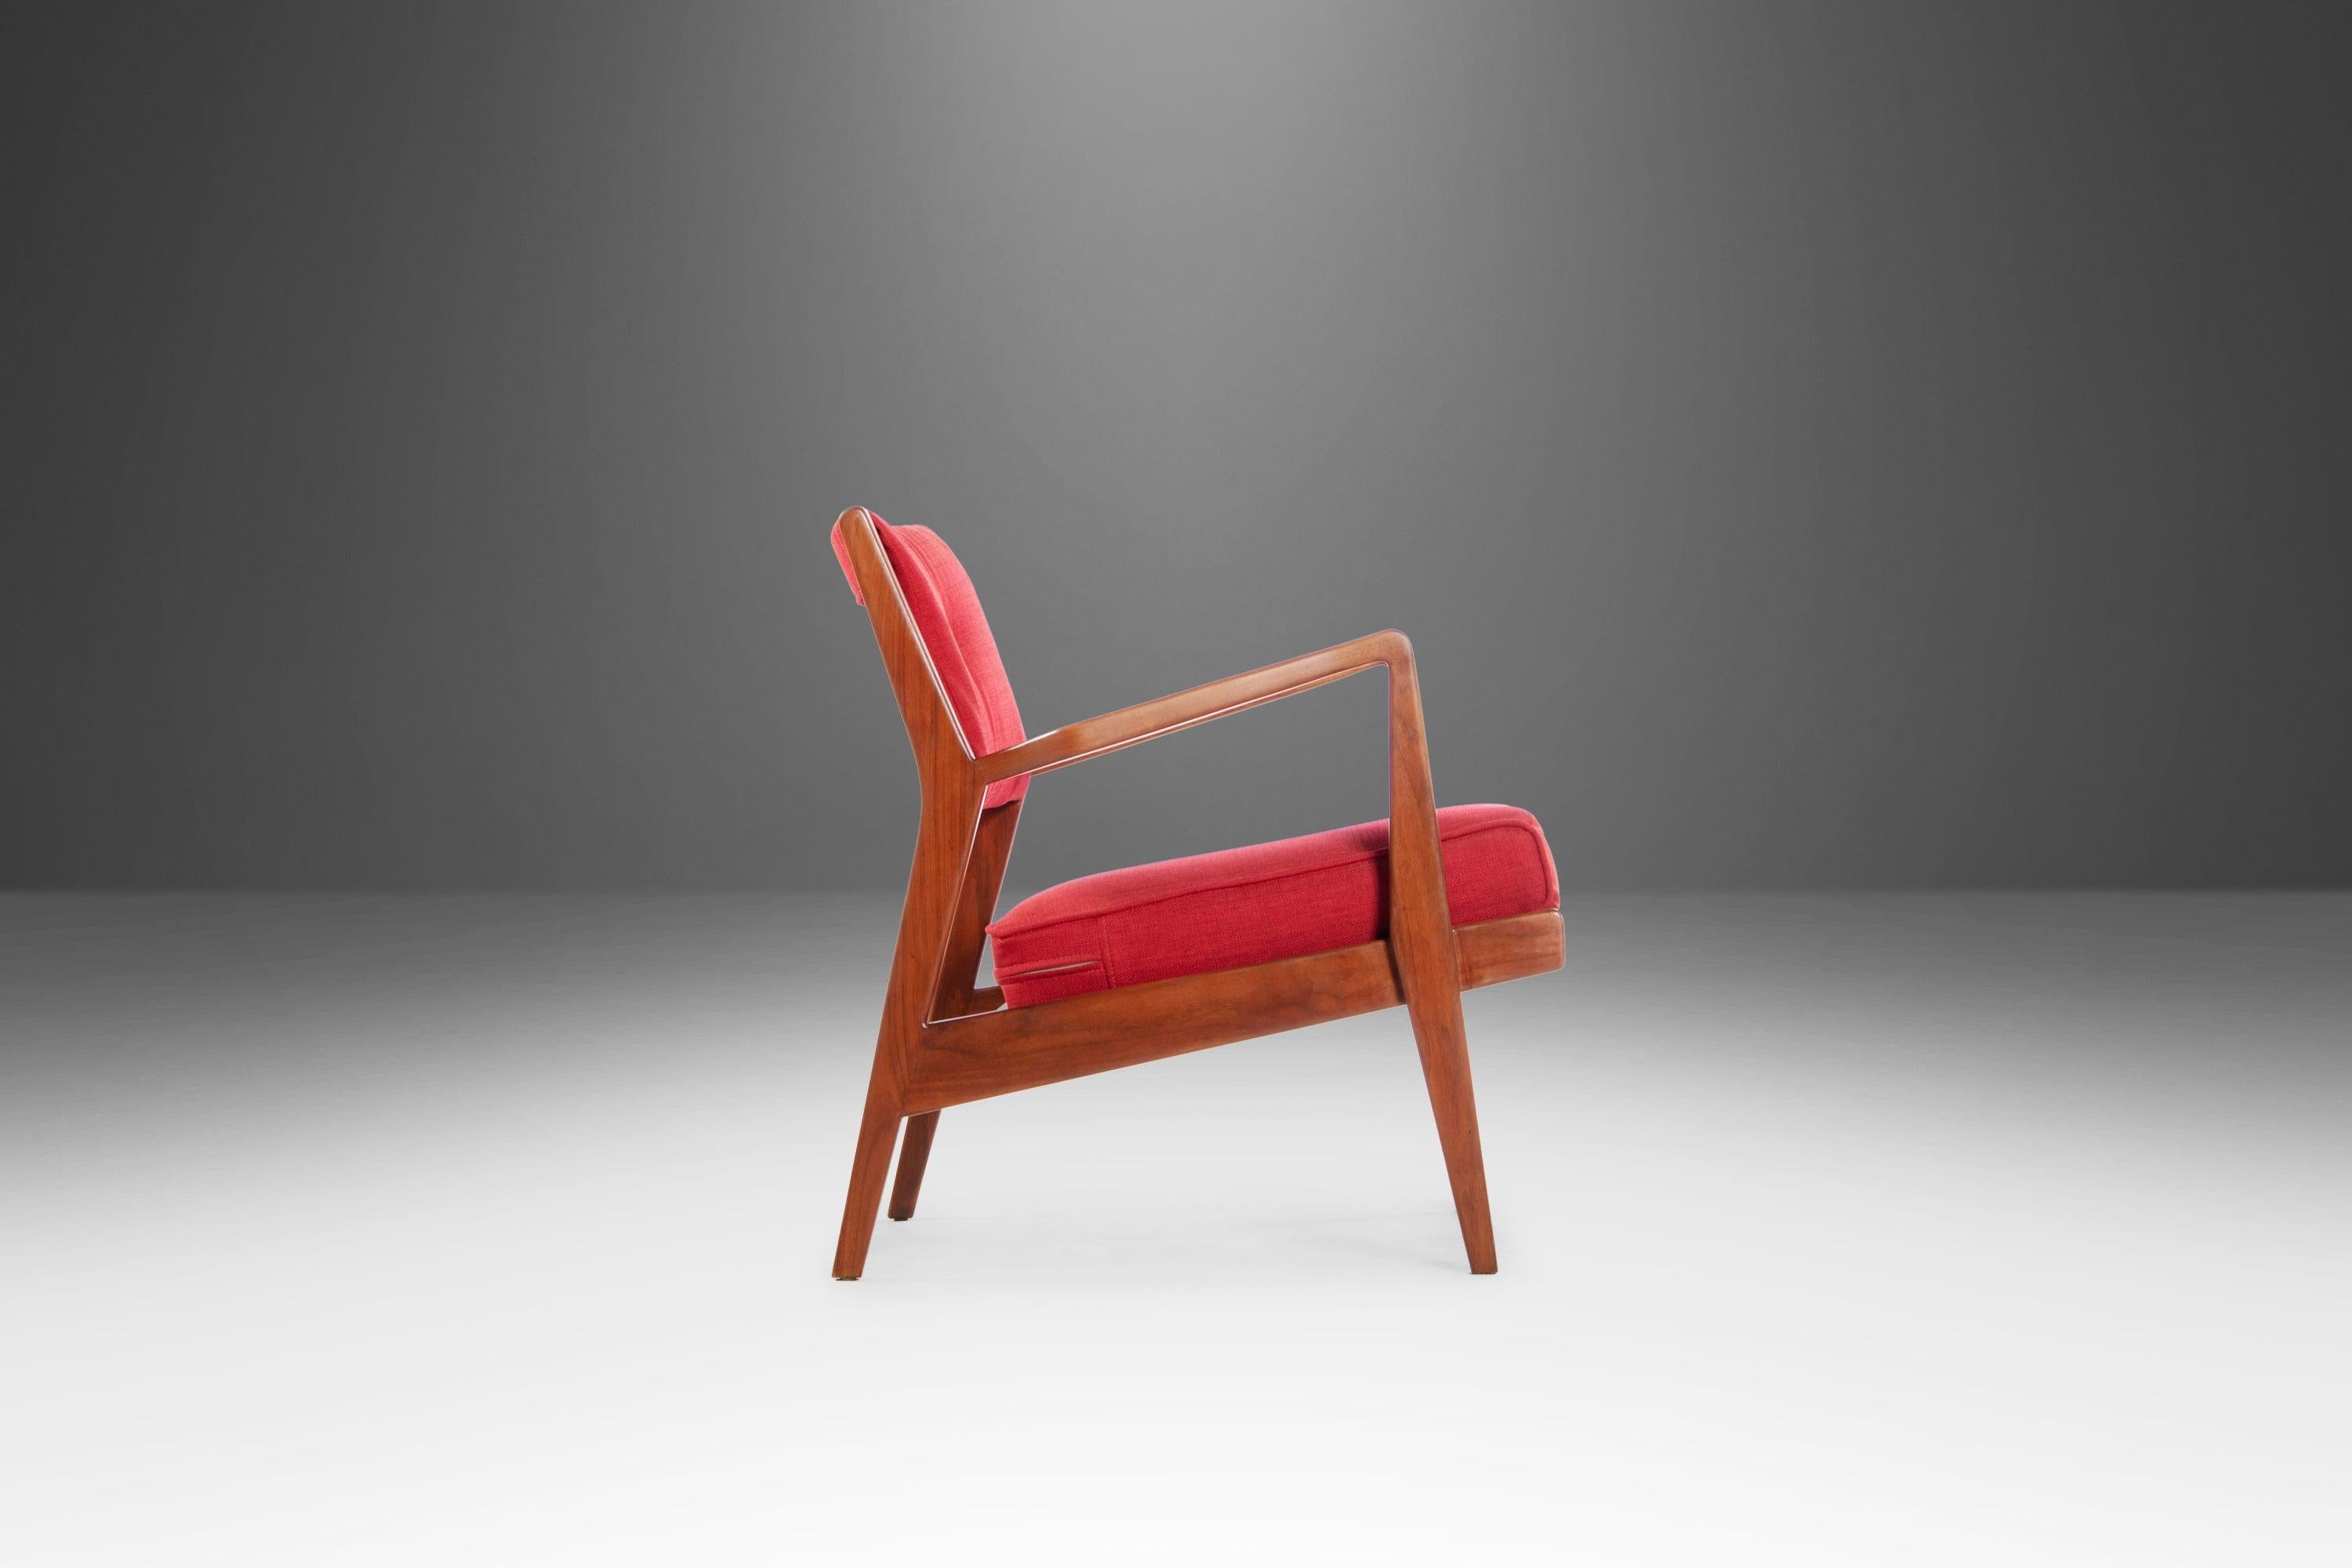 Mid-20th Century Set of Two '2' Jens Risom for Knoll Lounge Chairs Model U-430, USA, c. 1960's